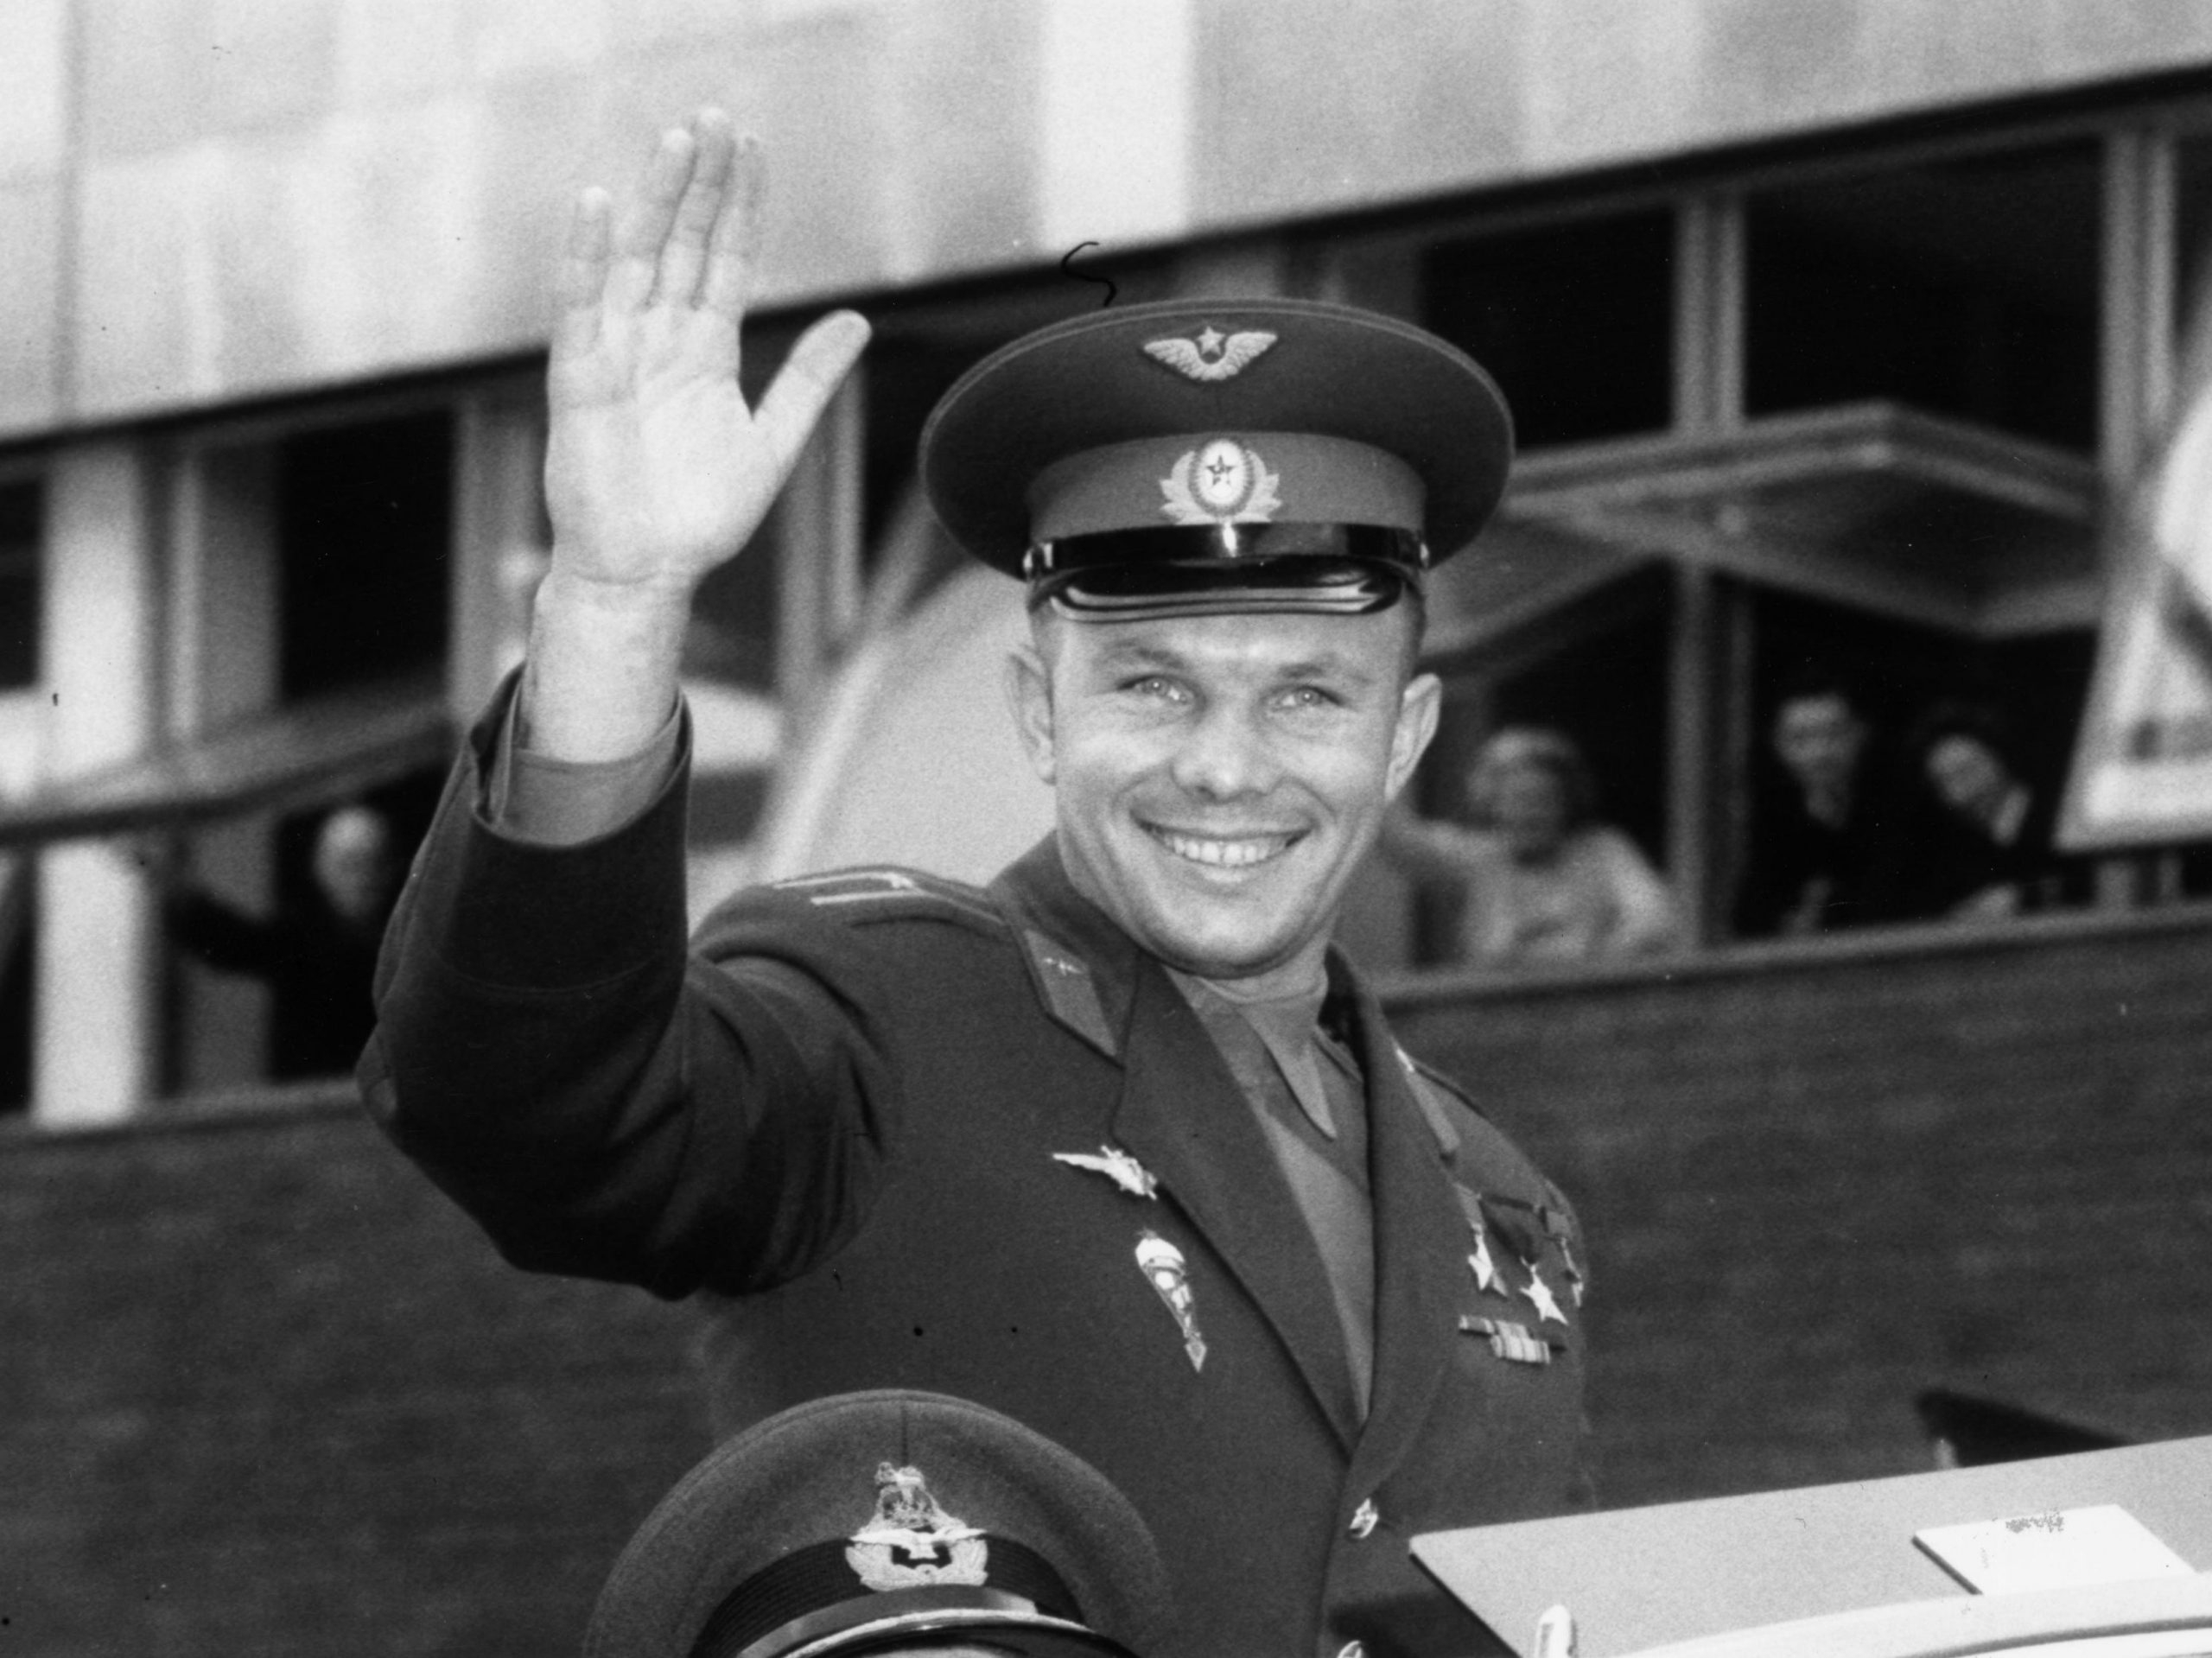 2560x1919 Yuri Gagarin, the first person in space, has had his name removed from a Space Foundation fundraiser, following Russia's invasion of Ukraine